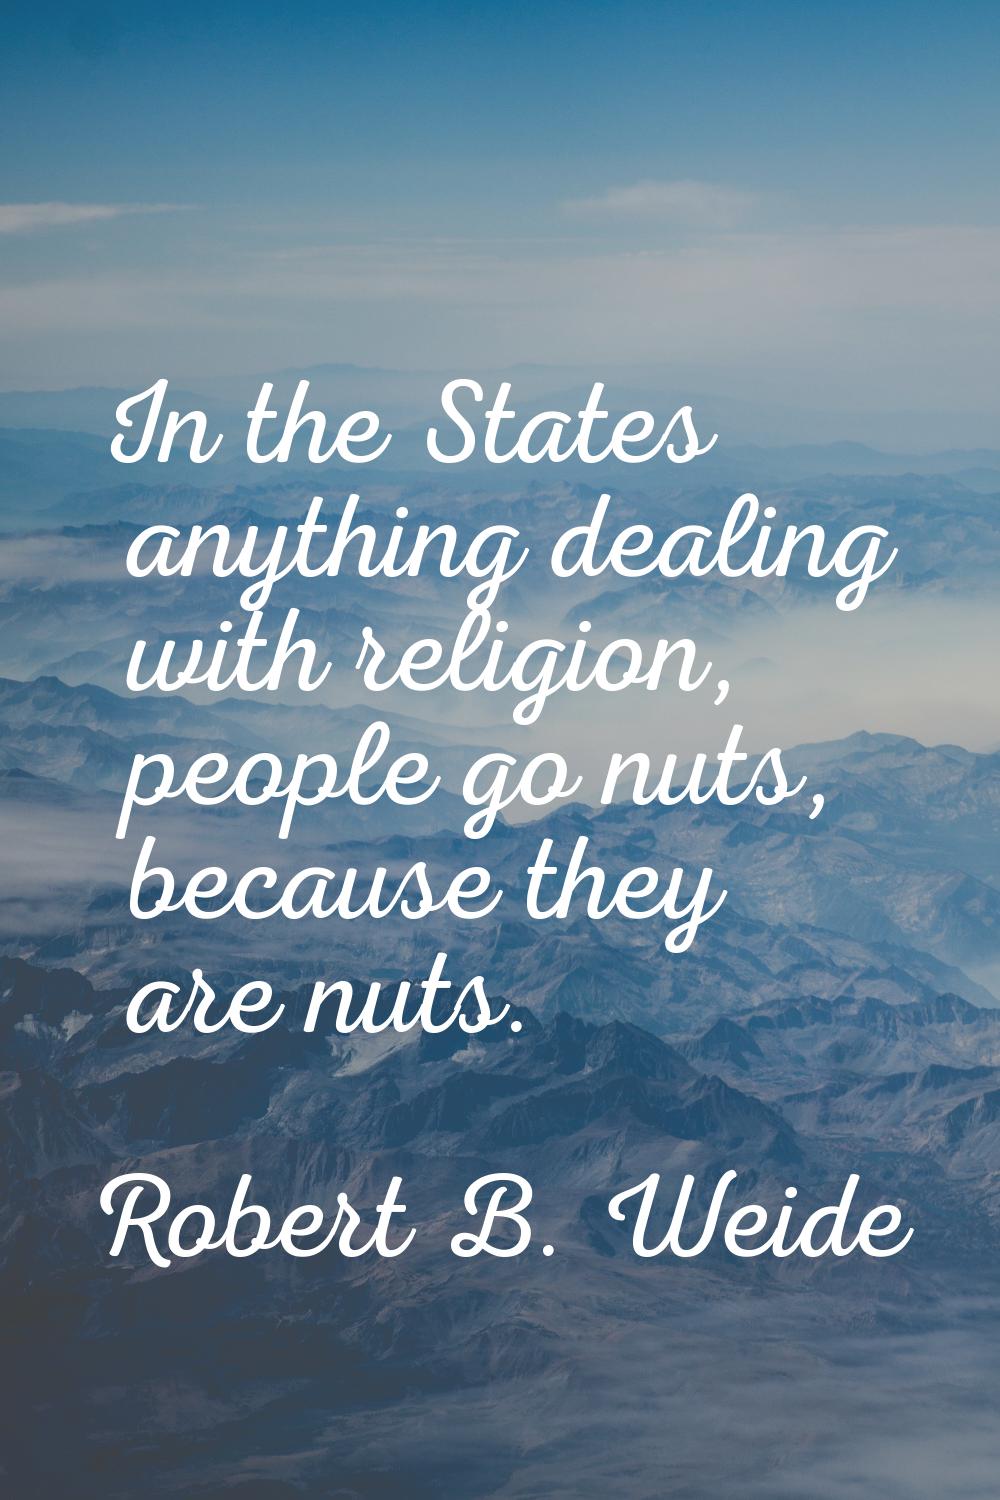 In the States anything dealing with religion, people go nuts, because they are nuts.